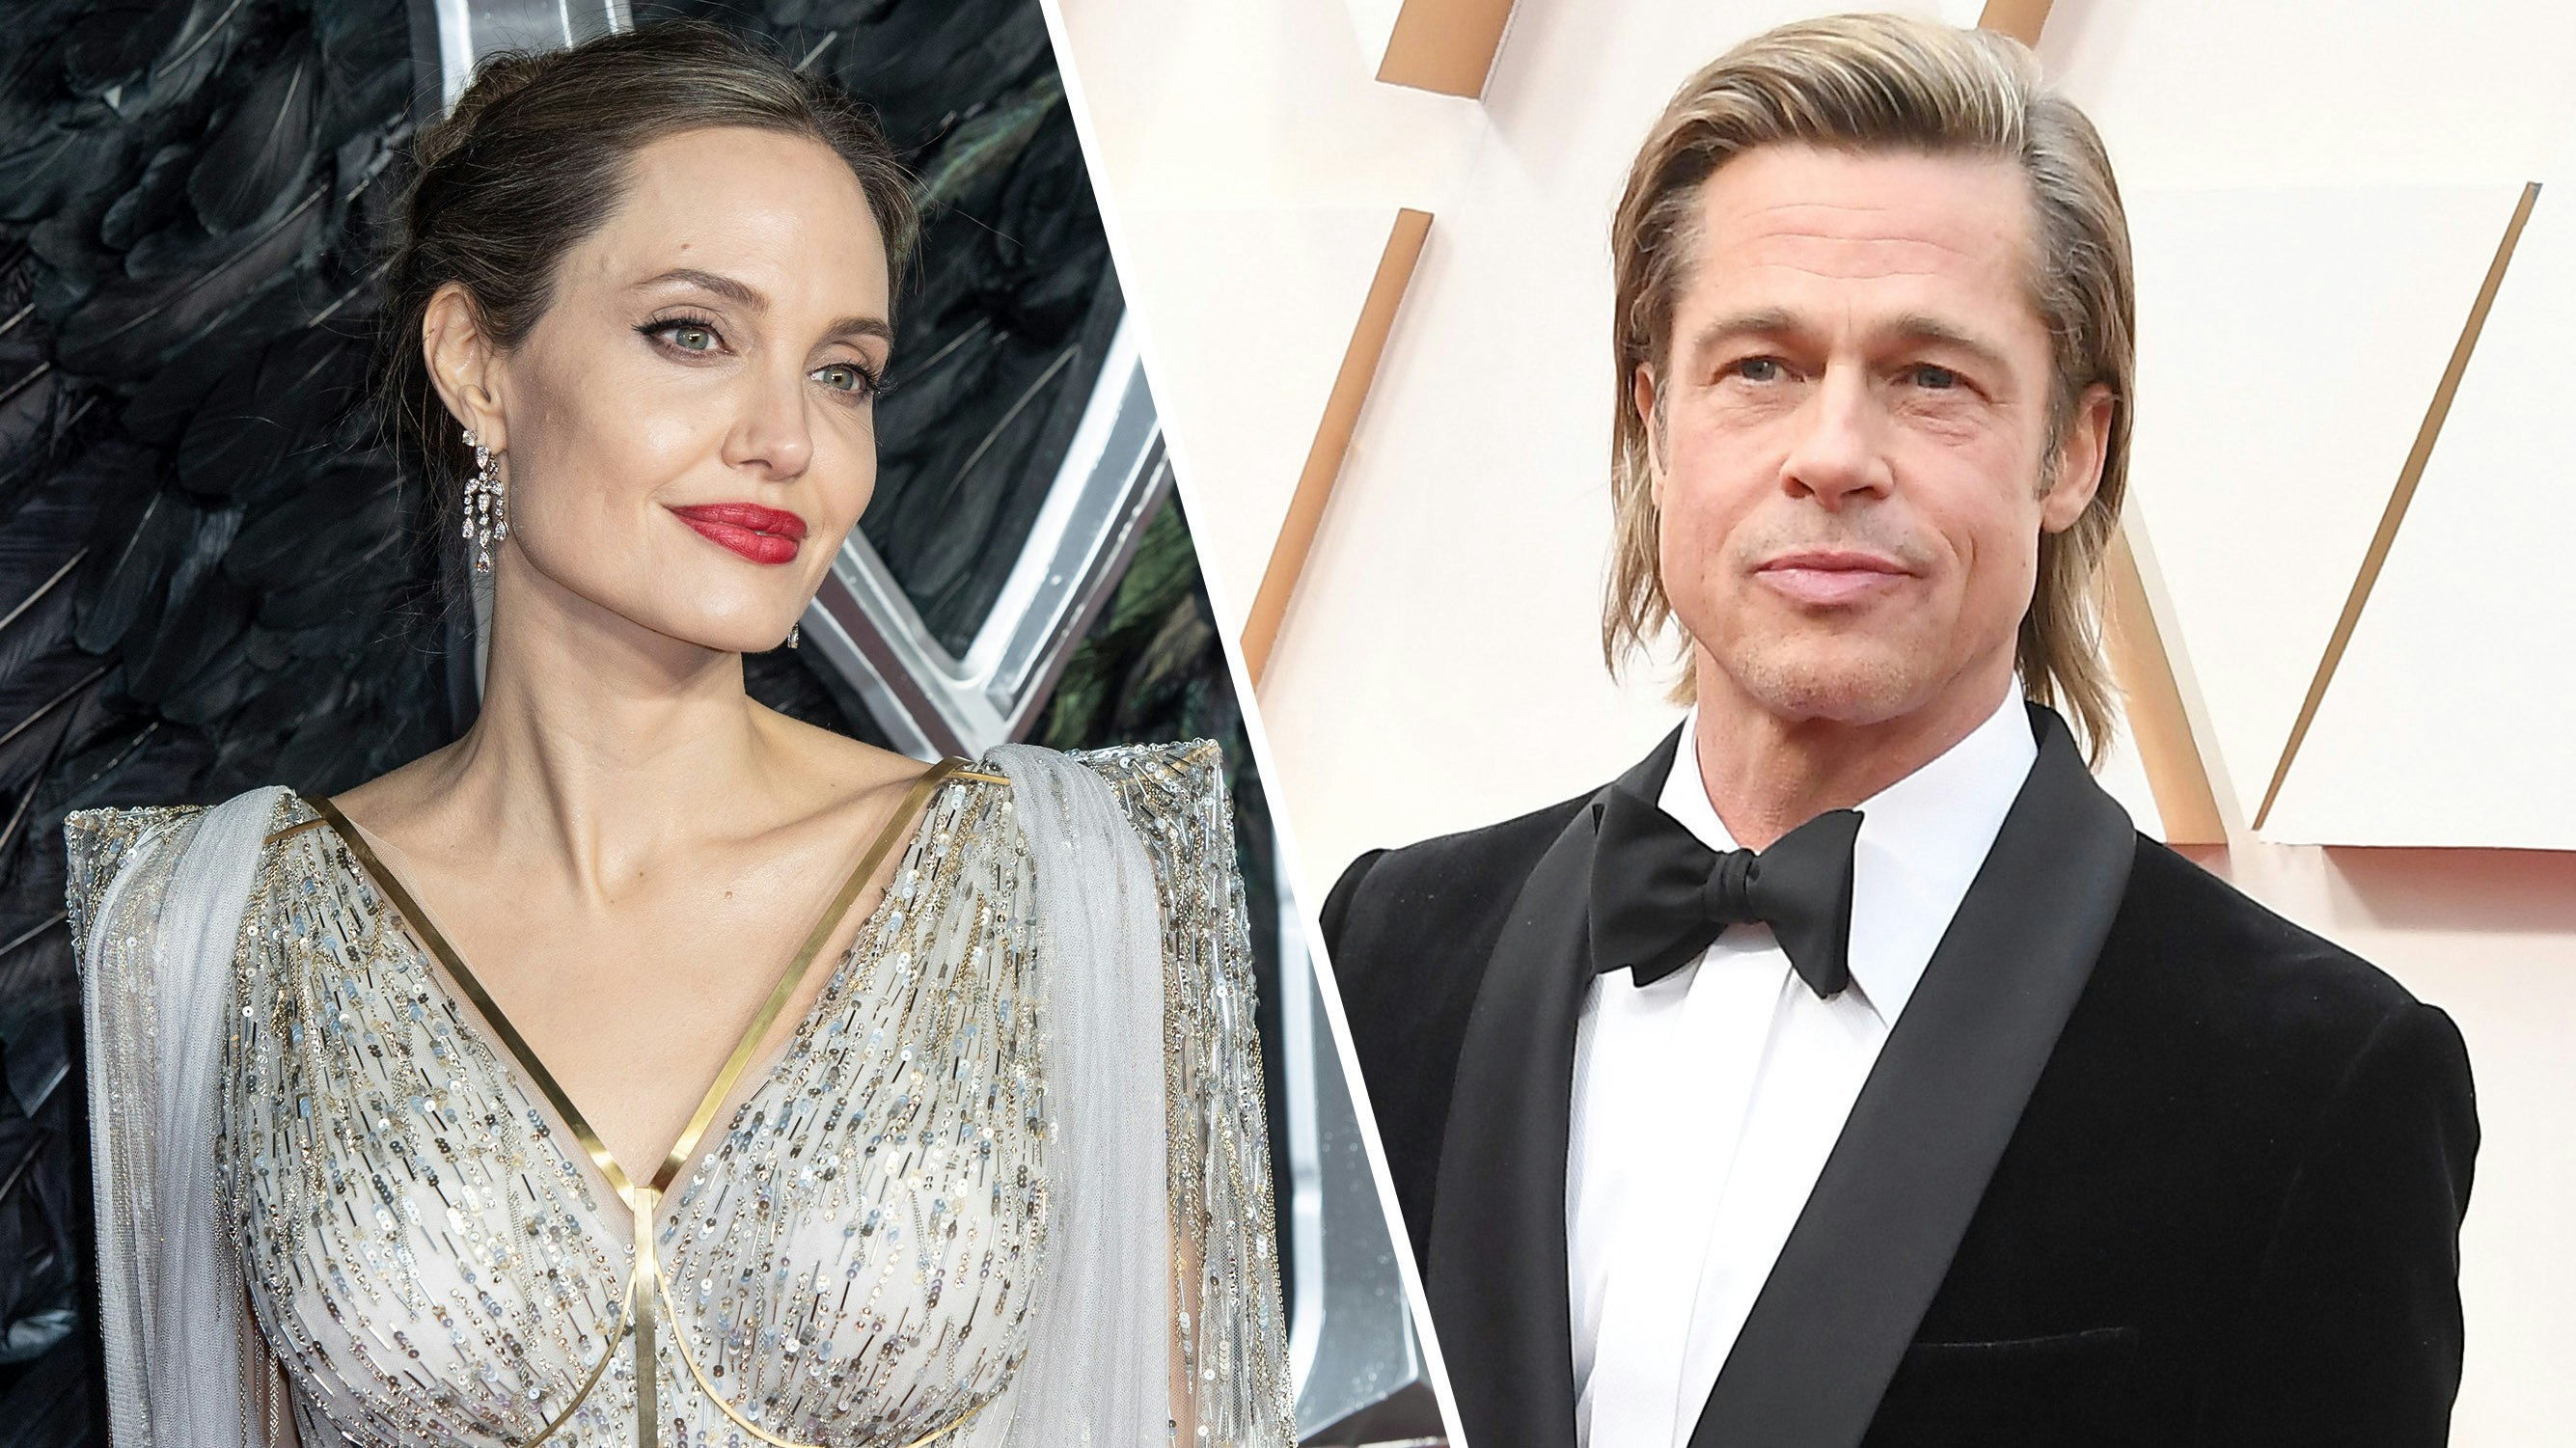 EXCLUSIVE* Did Angelina Jolie secretly tie the knot with Brad Pitt